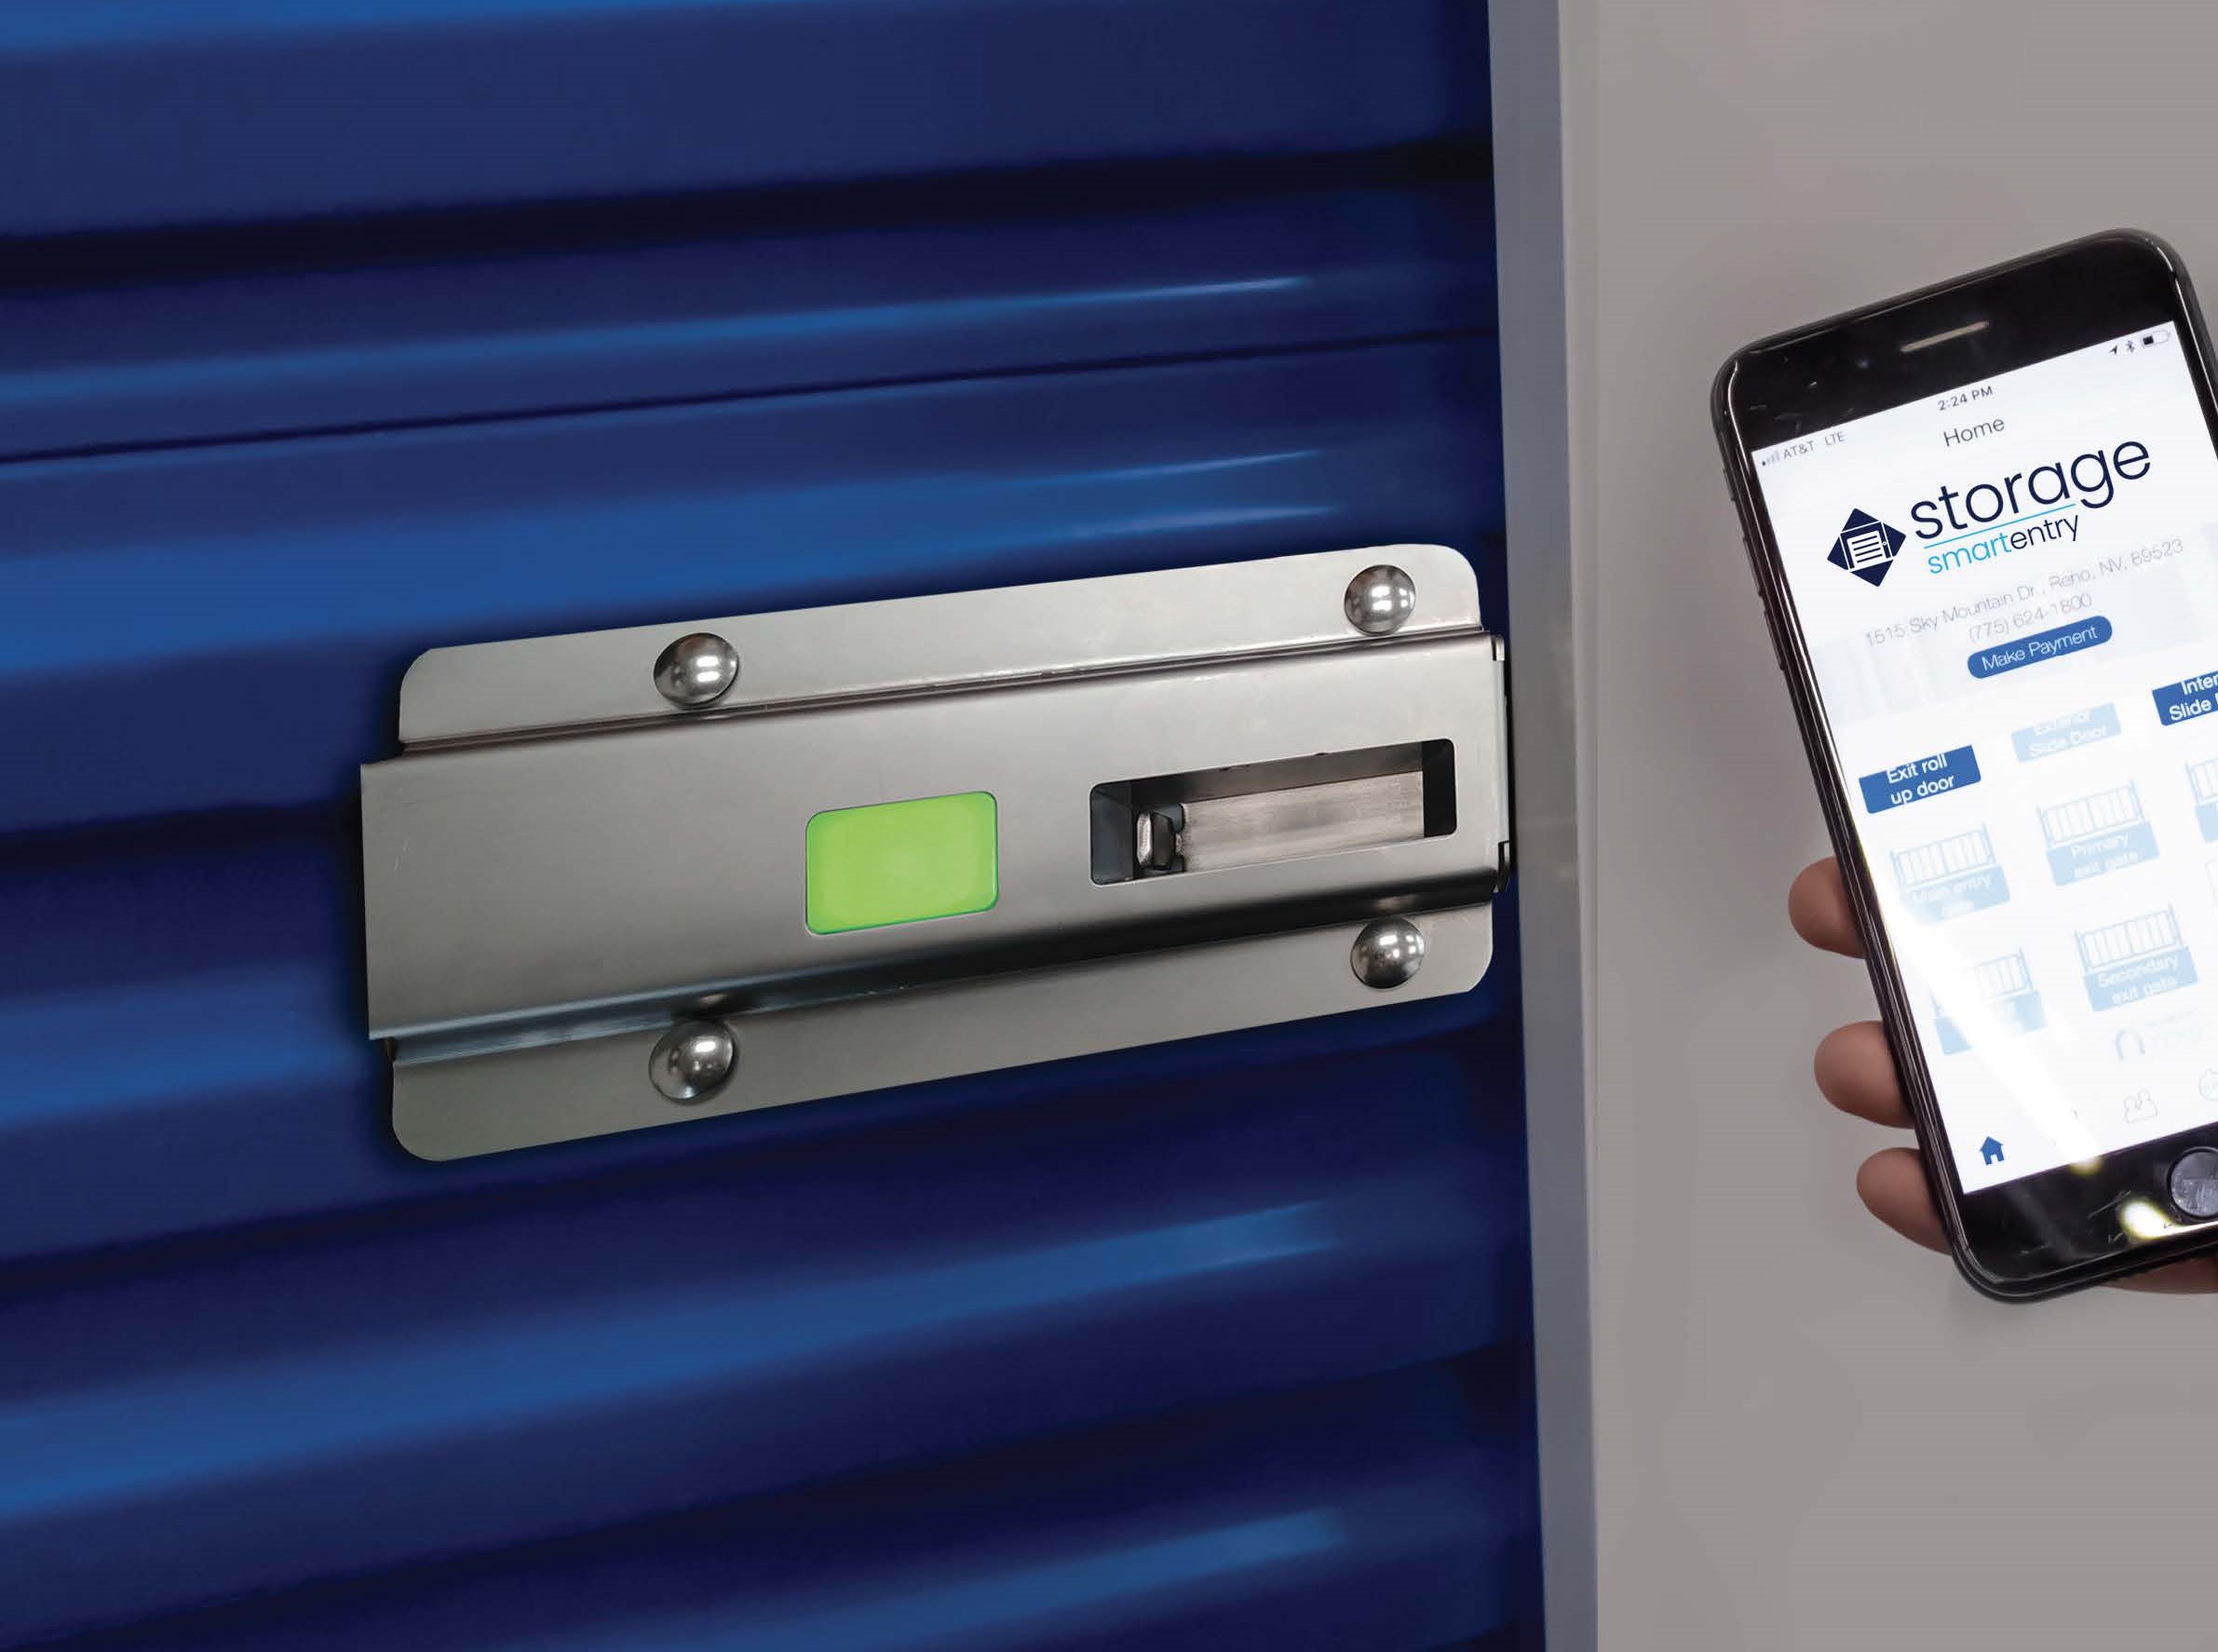 Red Rocks Self Storage: Superior Security with Smart Lock Technology